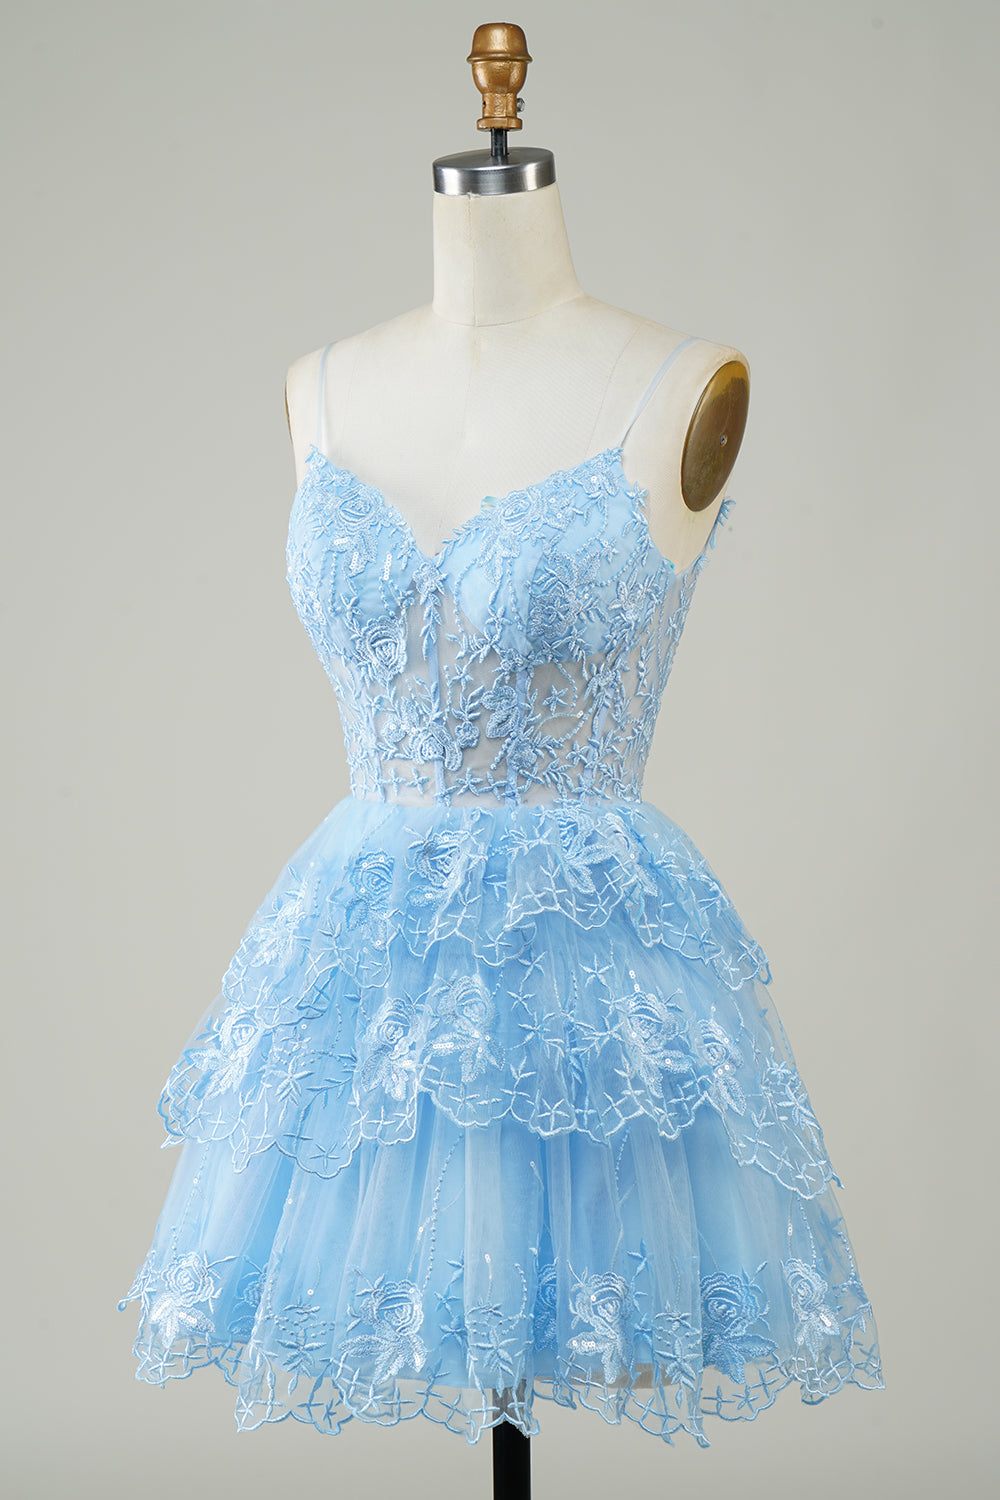 Gorgeous A Line Spaghetti Straps Blue Sparkly Corset Homecoming Dress